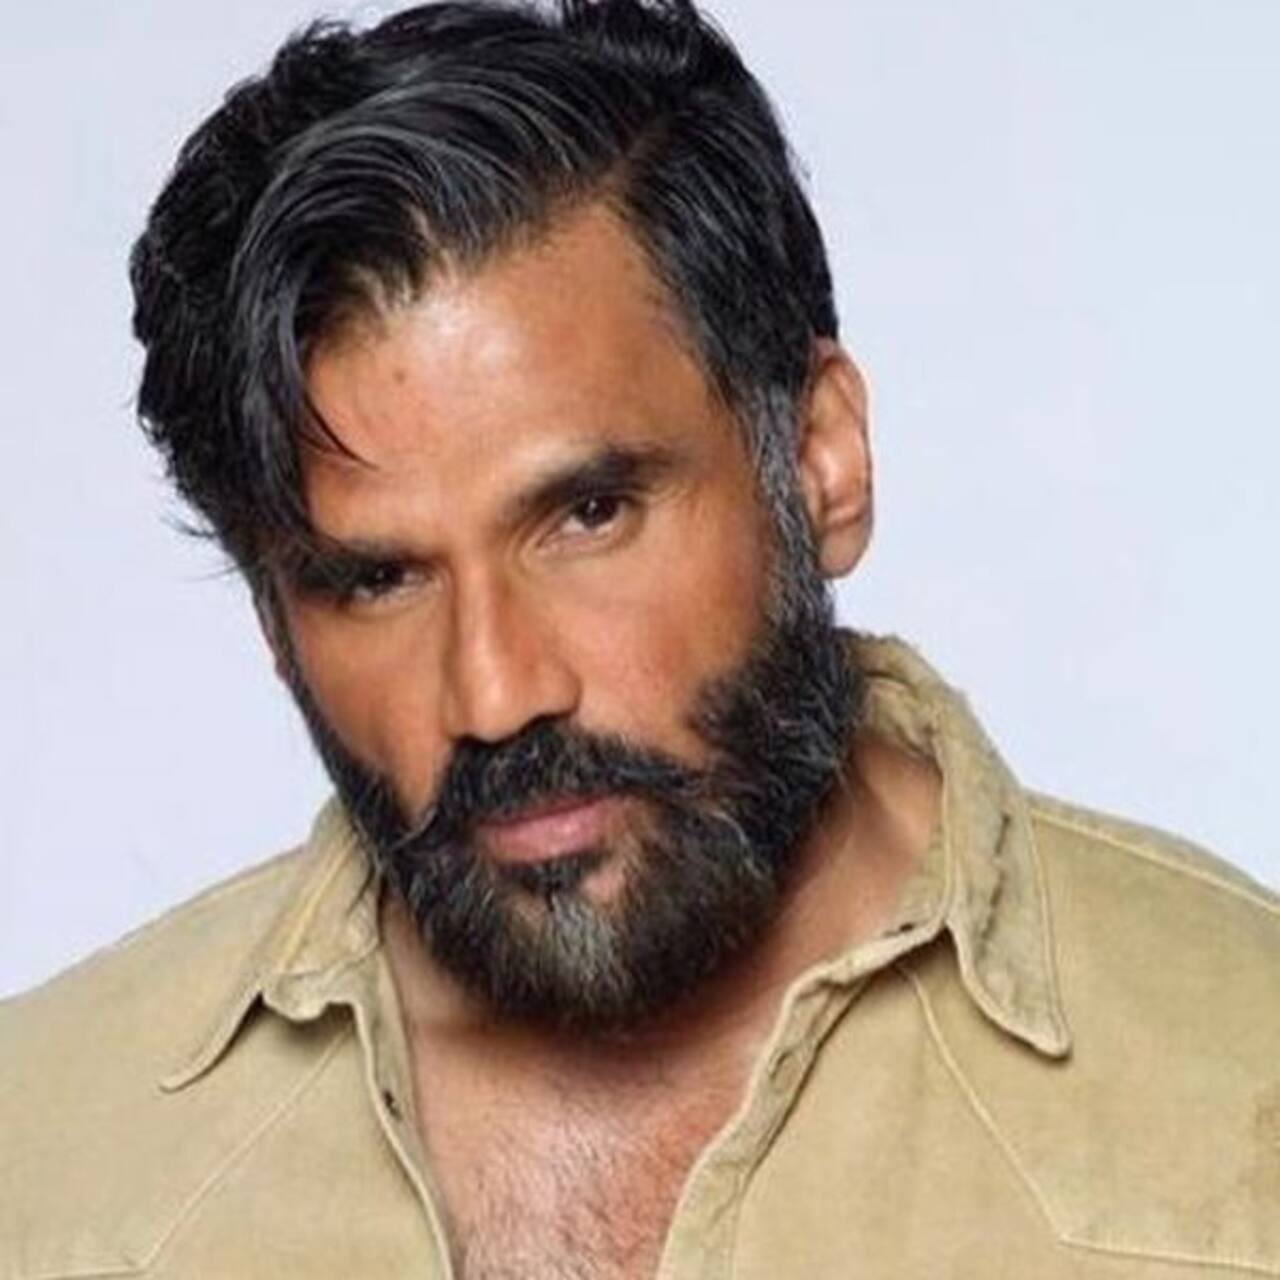 Suniel Shetty: Excited about working on the third film in the Hera Pheri franchise